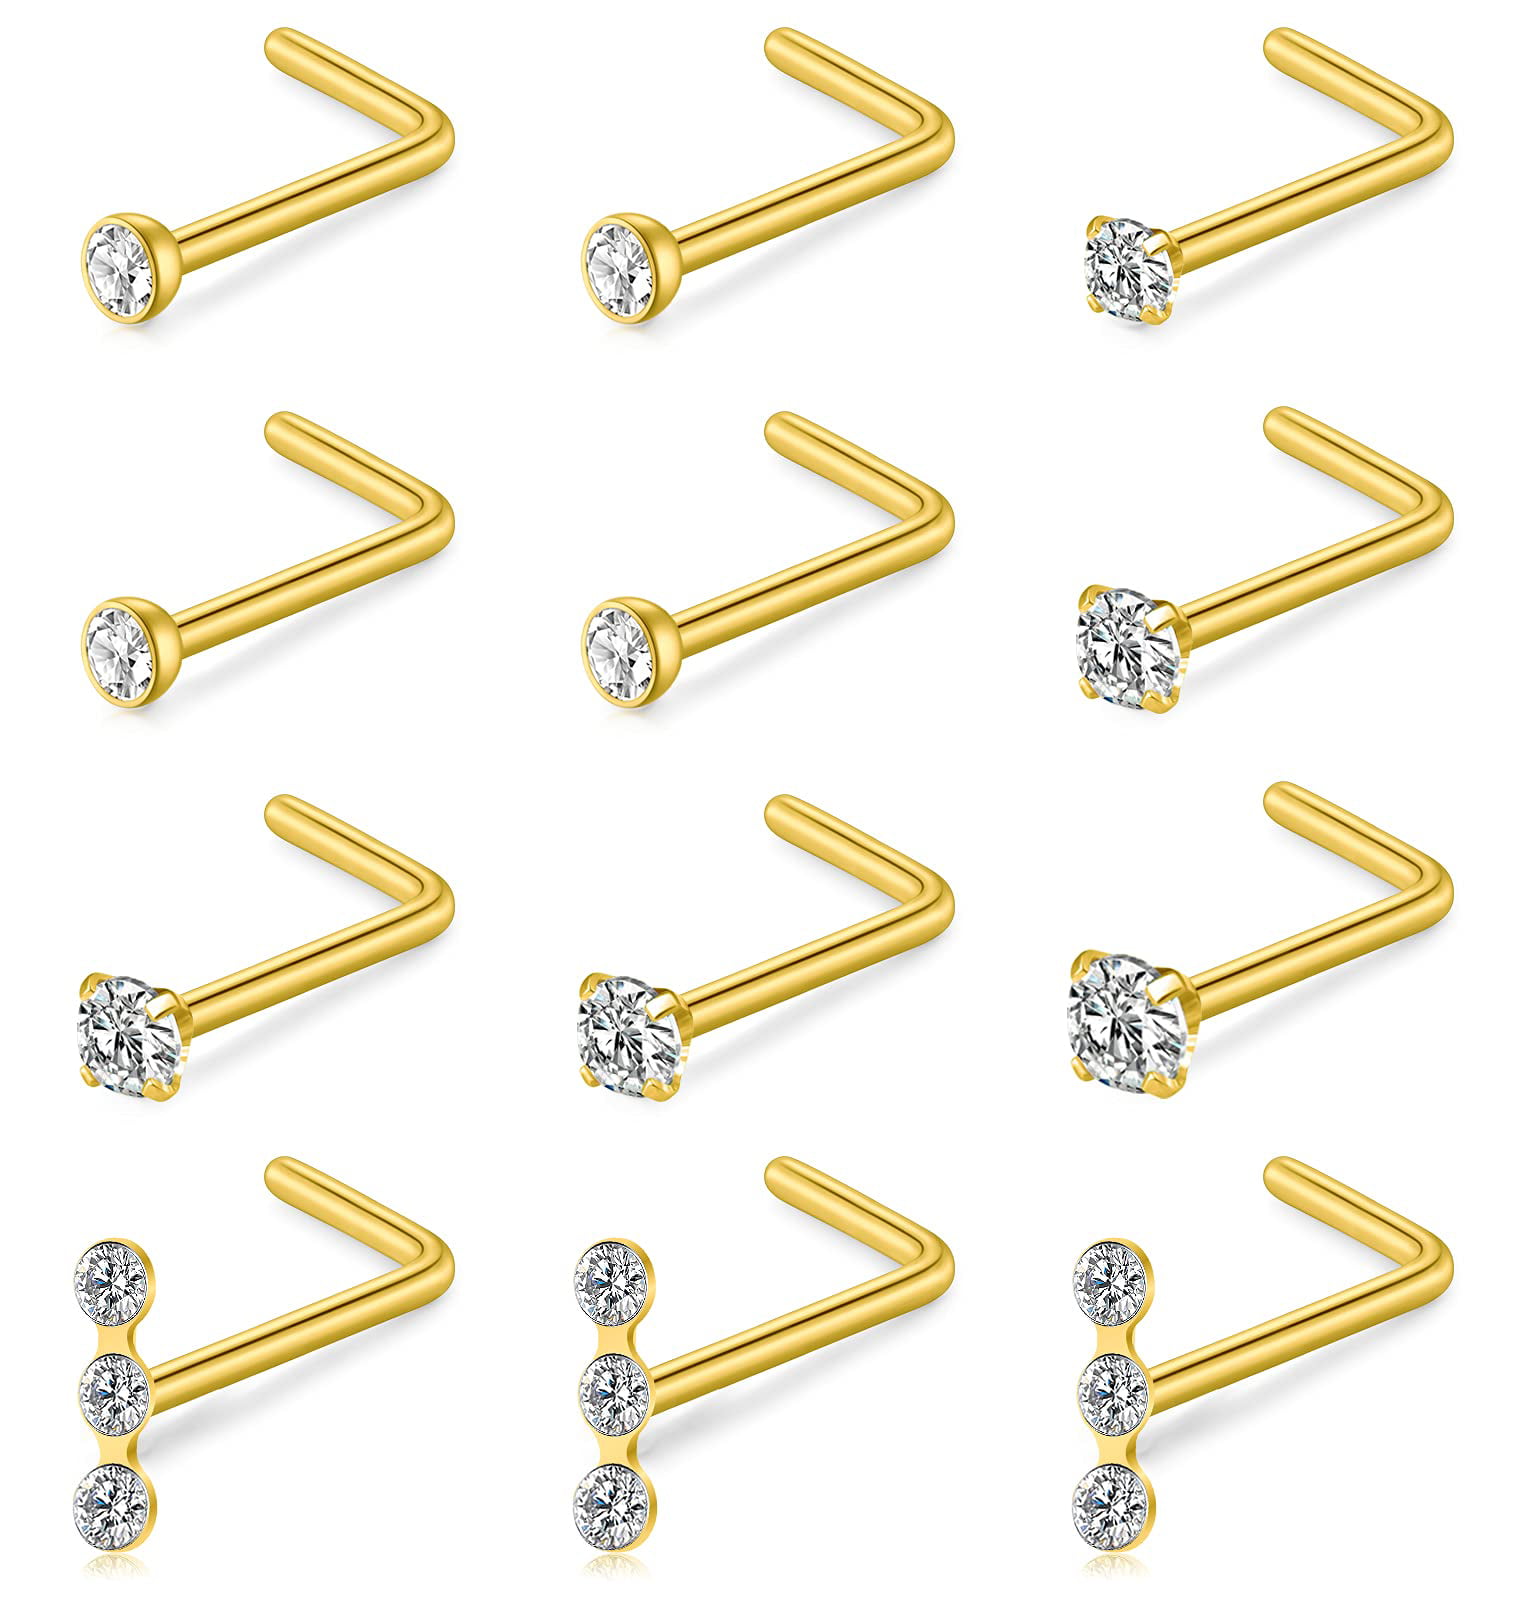 Briana Williams 18G Surgical Steel Nose Rings Studs Mix Color CZ Nose Studs L Shaped Nose Piercing Jewelry 1.5mm 2mm 2.5mm 